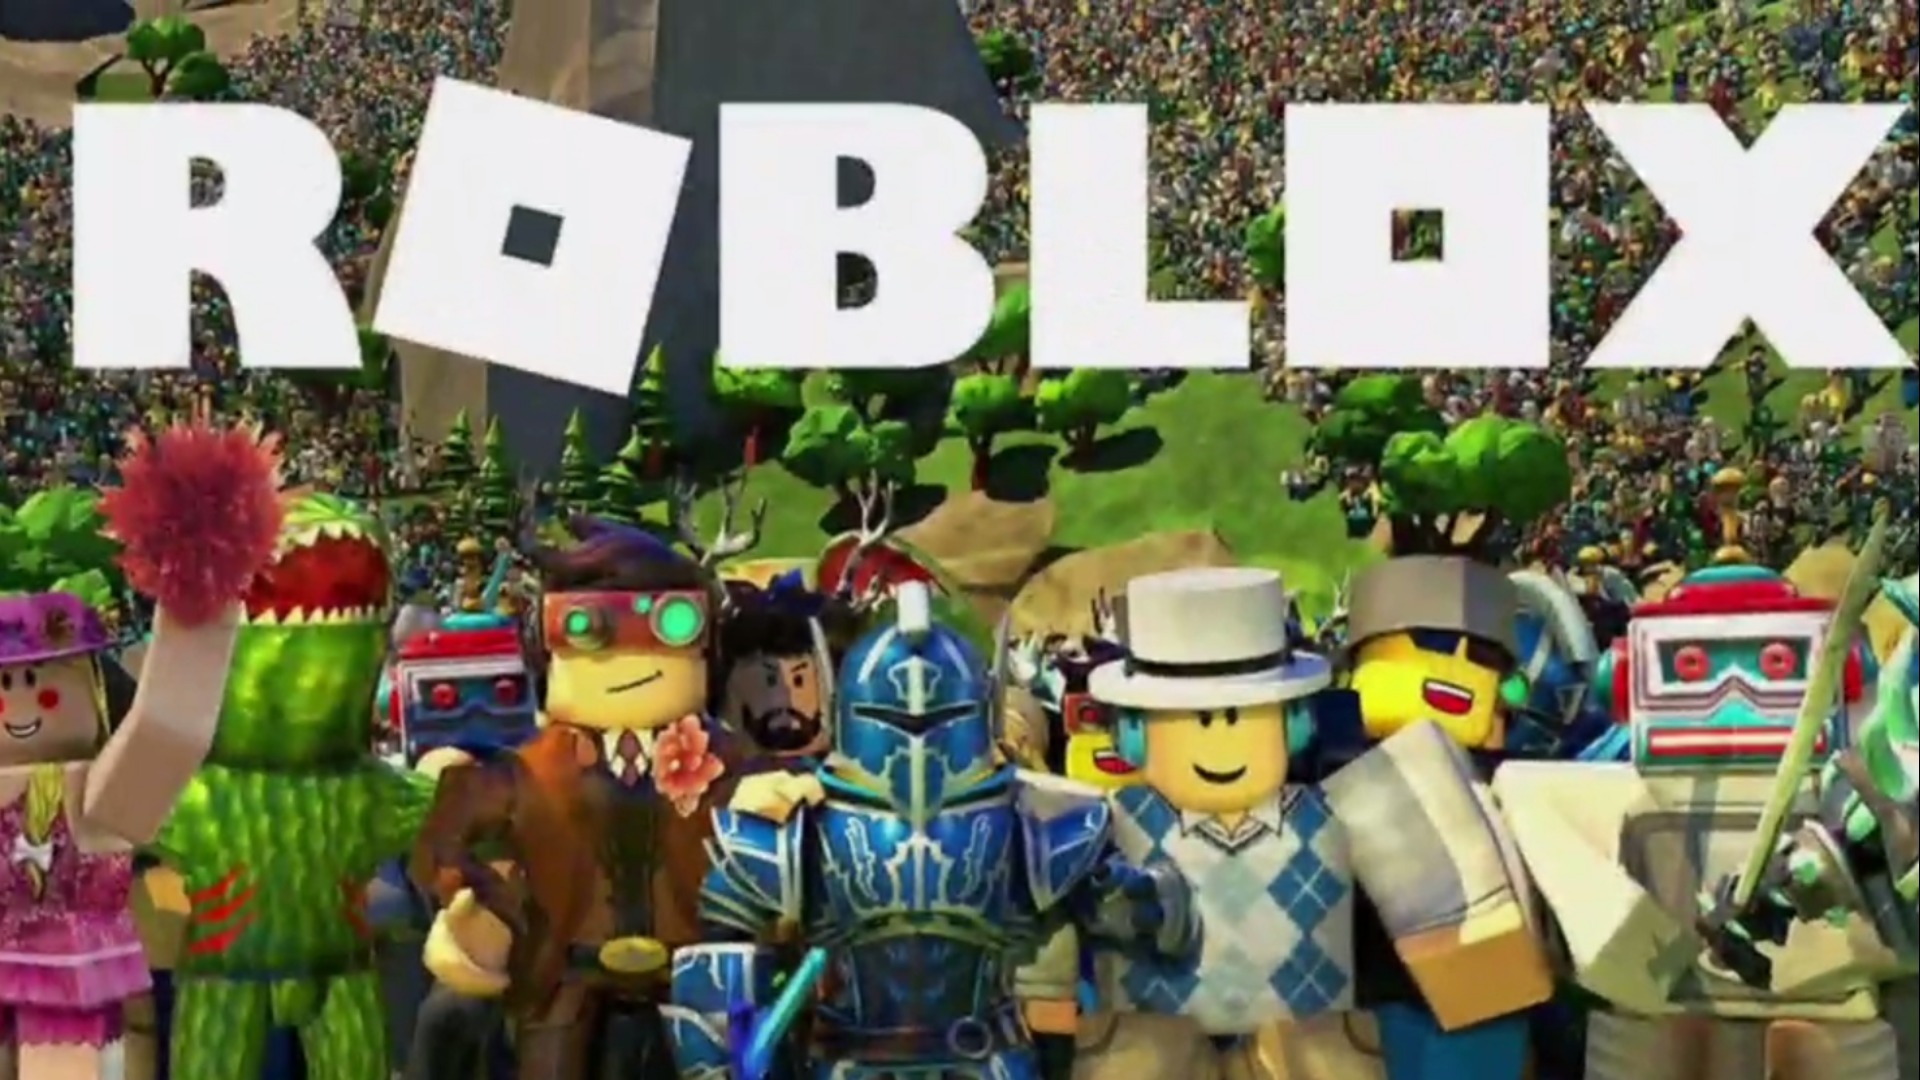 New Questions About Some Inappropriate Content On The Gaming Platform Roblox Video - roblox cp